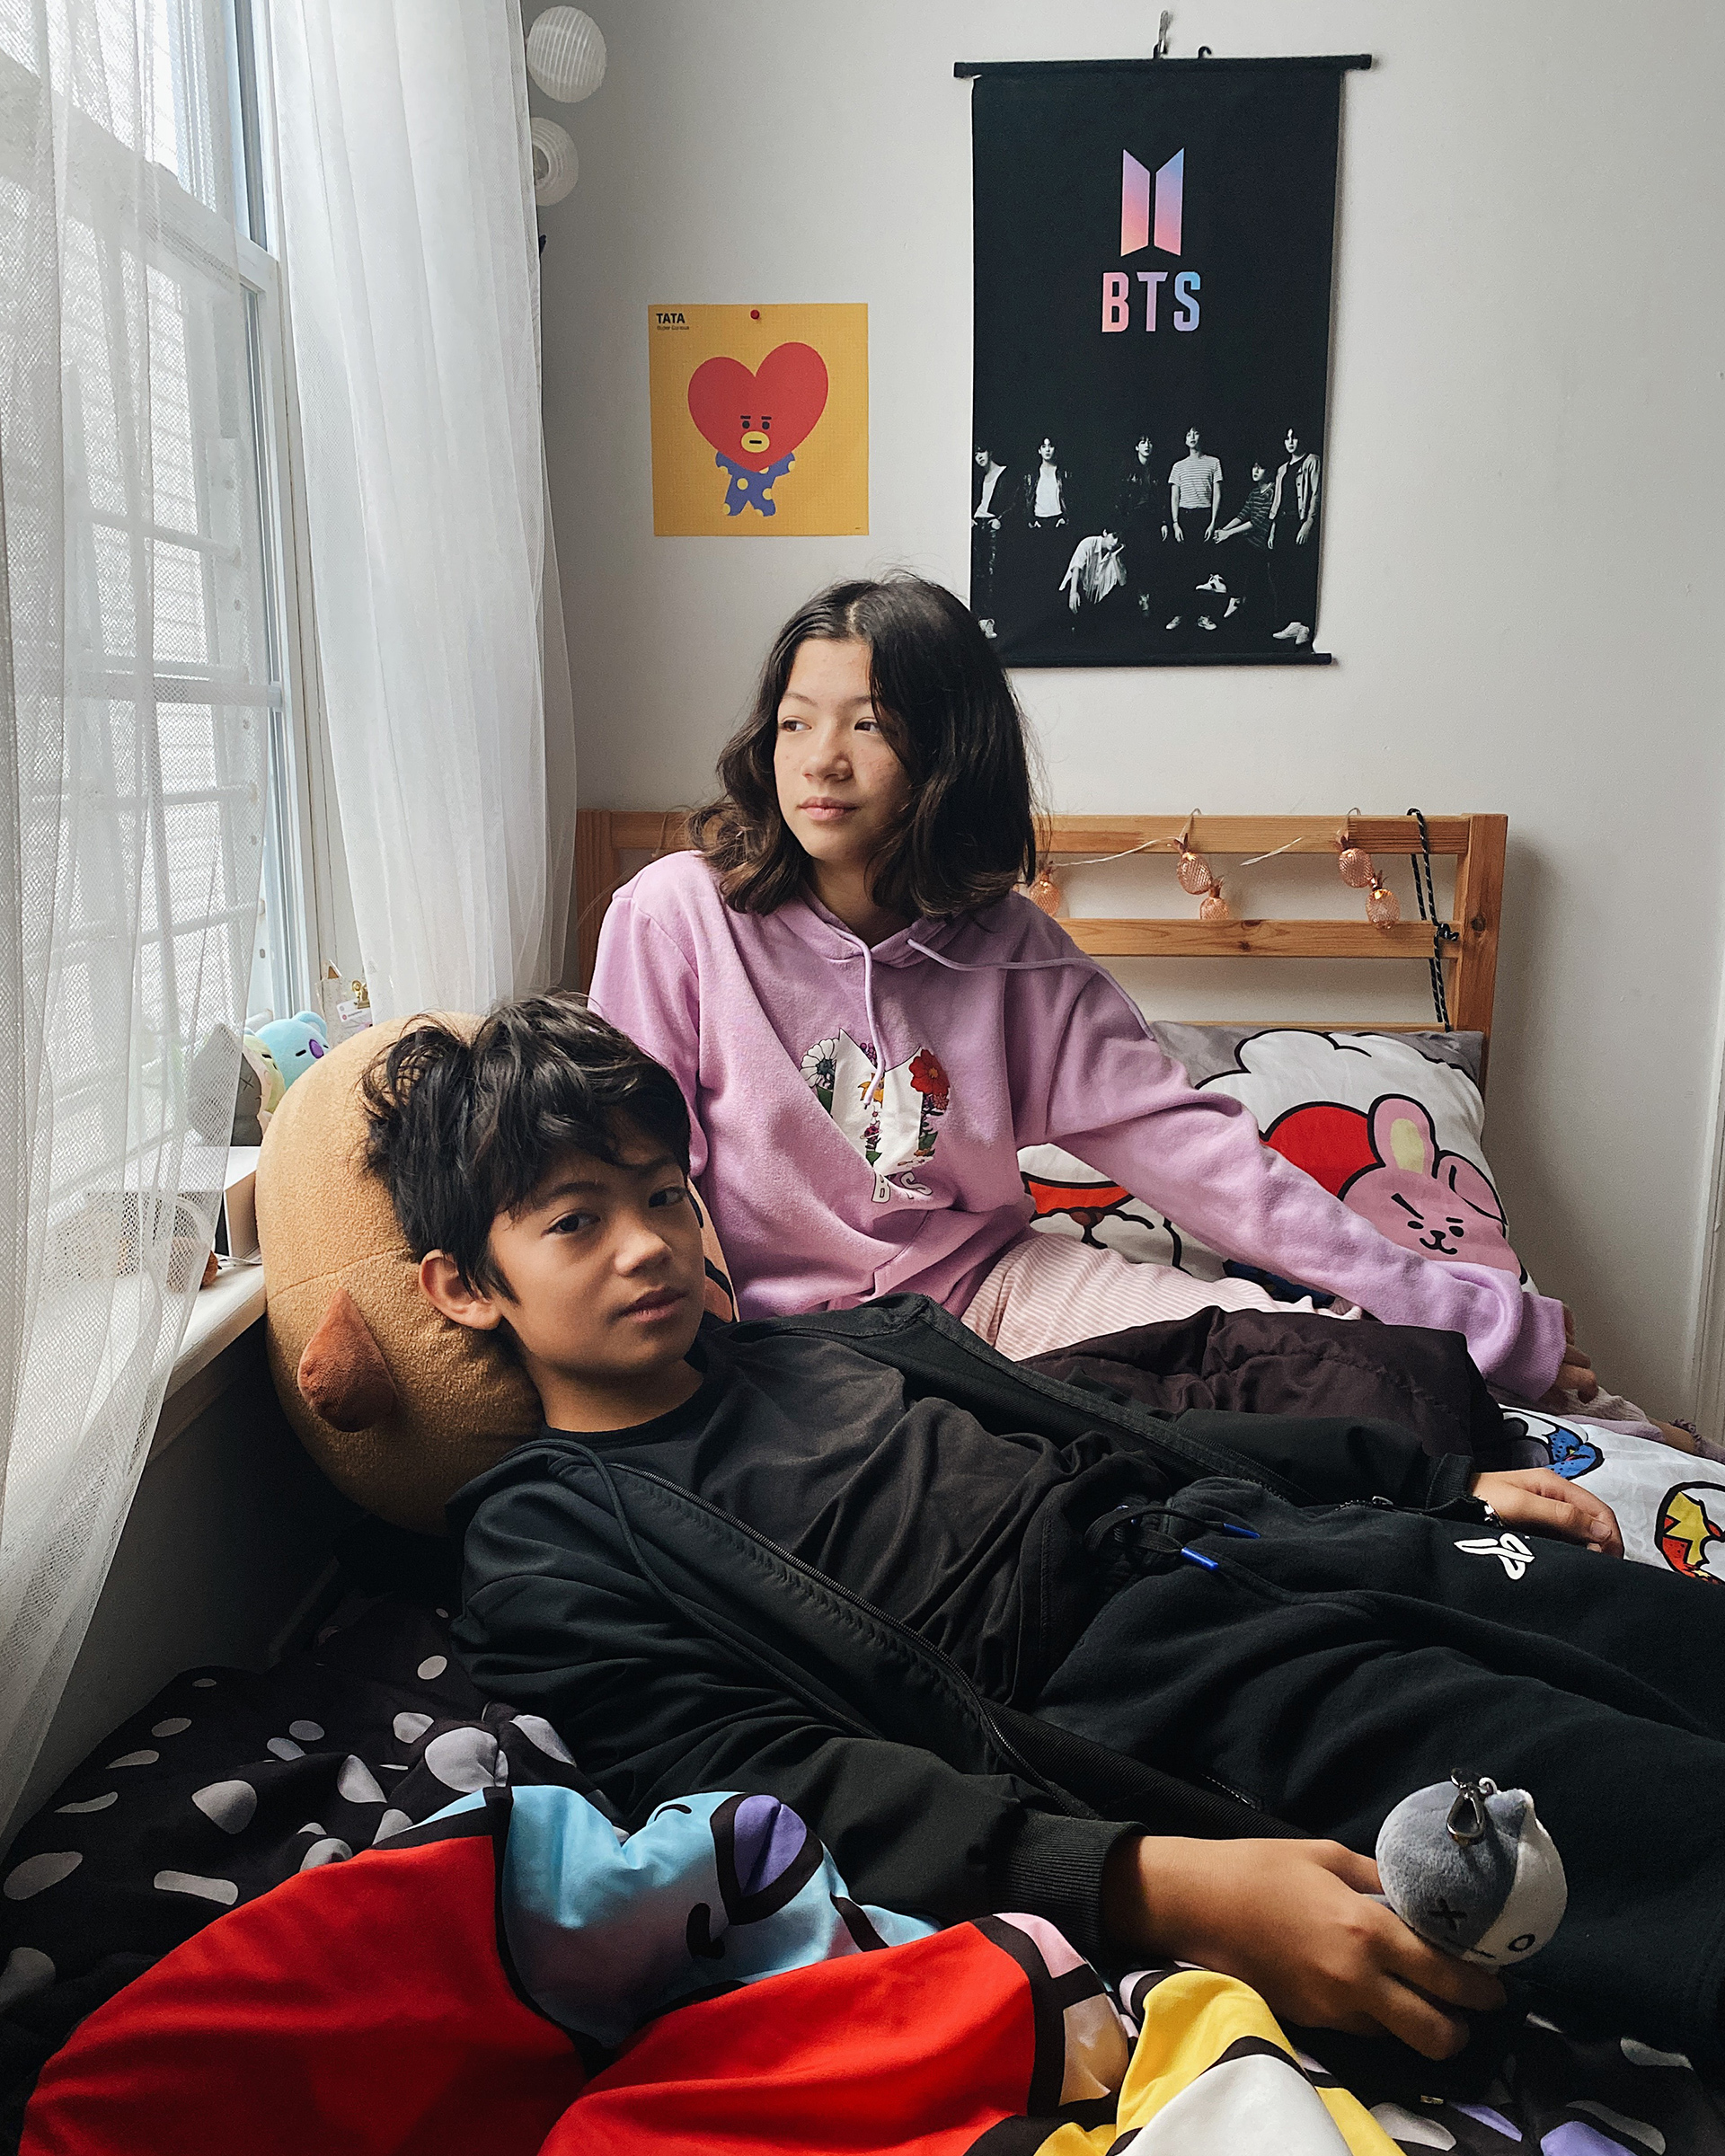 <strong>Jackson and Charlotte</strong>. "<a href="https://time.com/6122609/bts-army-photos/">These Portraits Show That the BTS ARMY Is Not a Monolith</a>," Nov. 24. (Hannah Yoon for TIME)